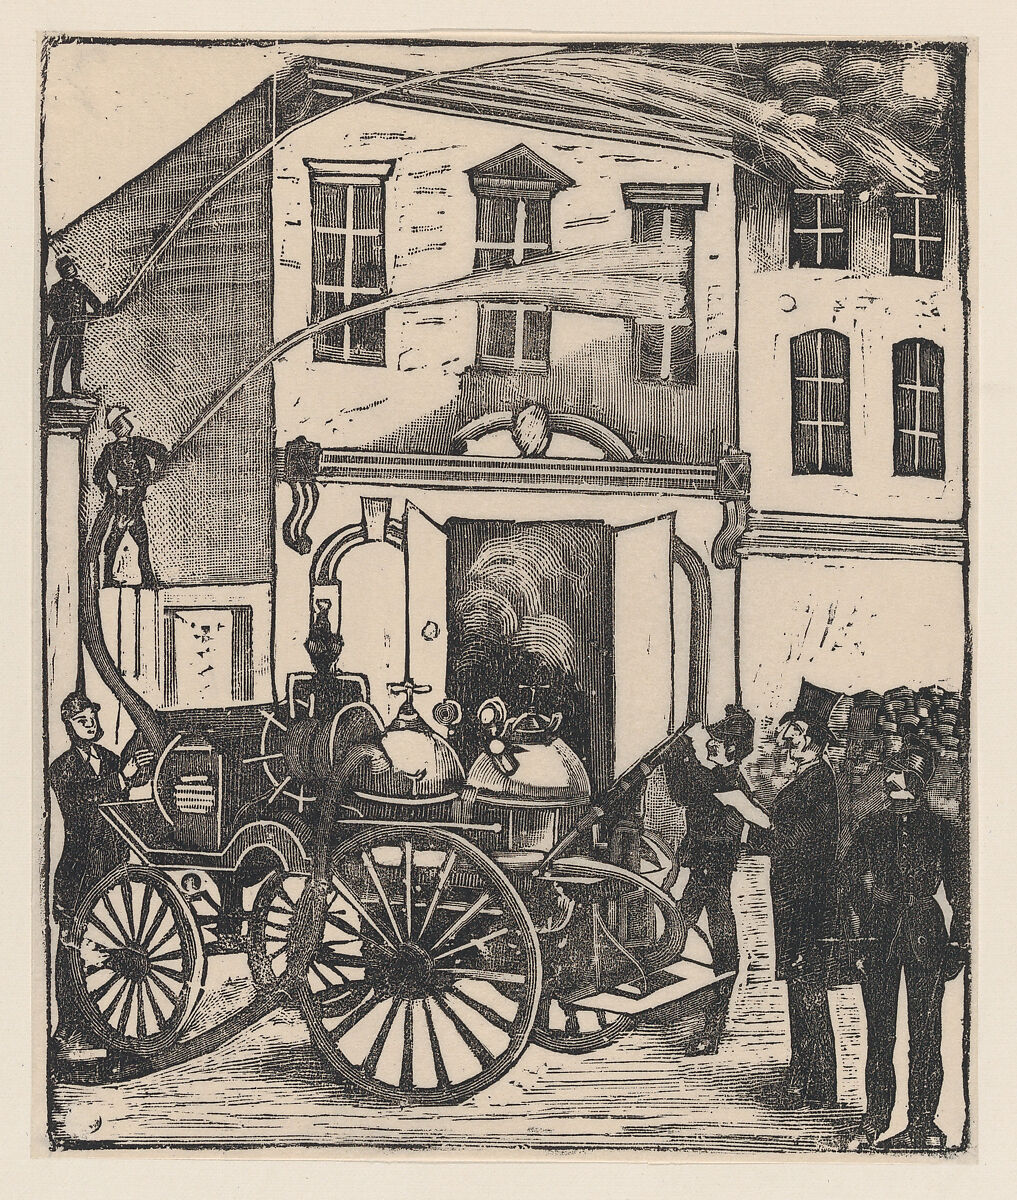 Firefighters putting out a fire in a house, firetruck in foreground, José Guadalupe Posada (Mexican, Aguascalientes 1852–1913 Mexico City), Type-metal engraving 